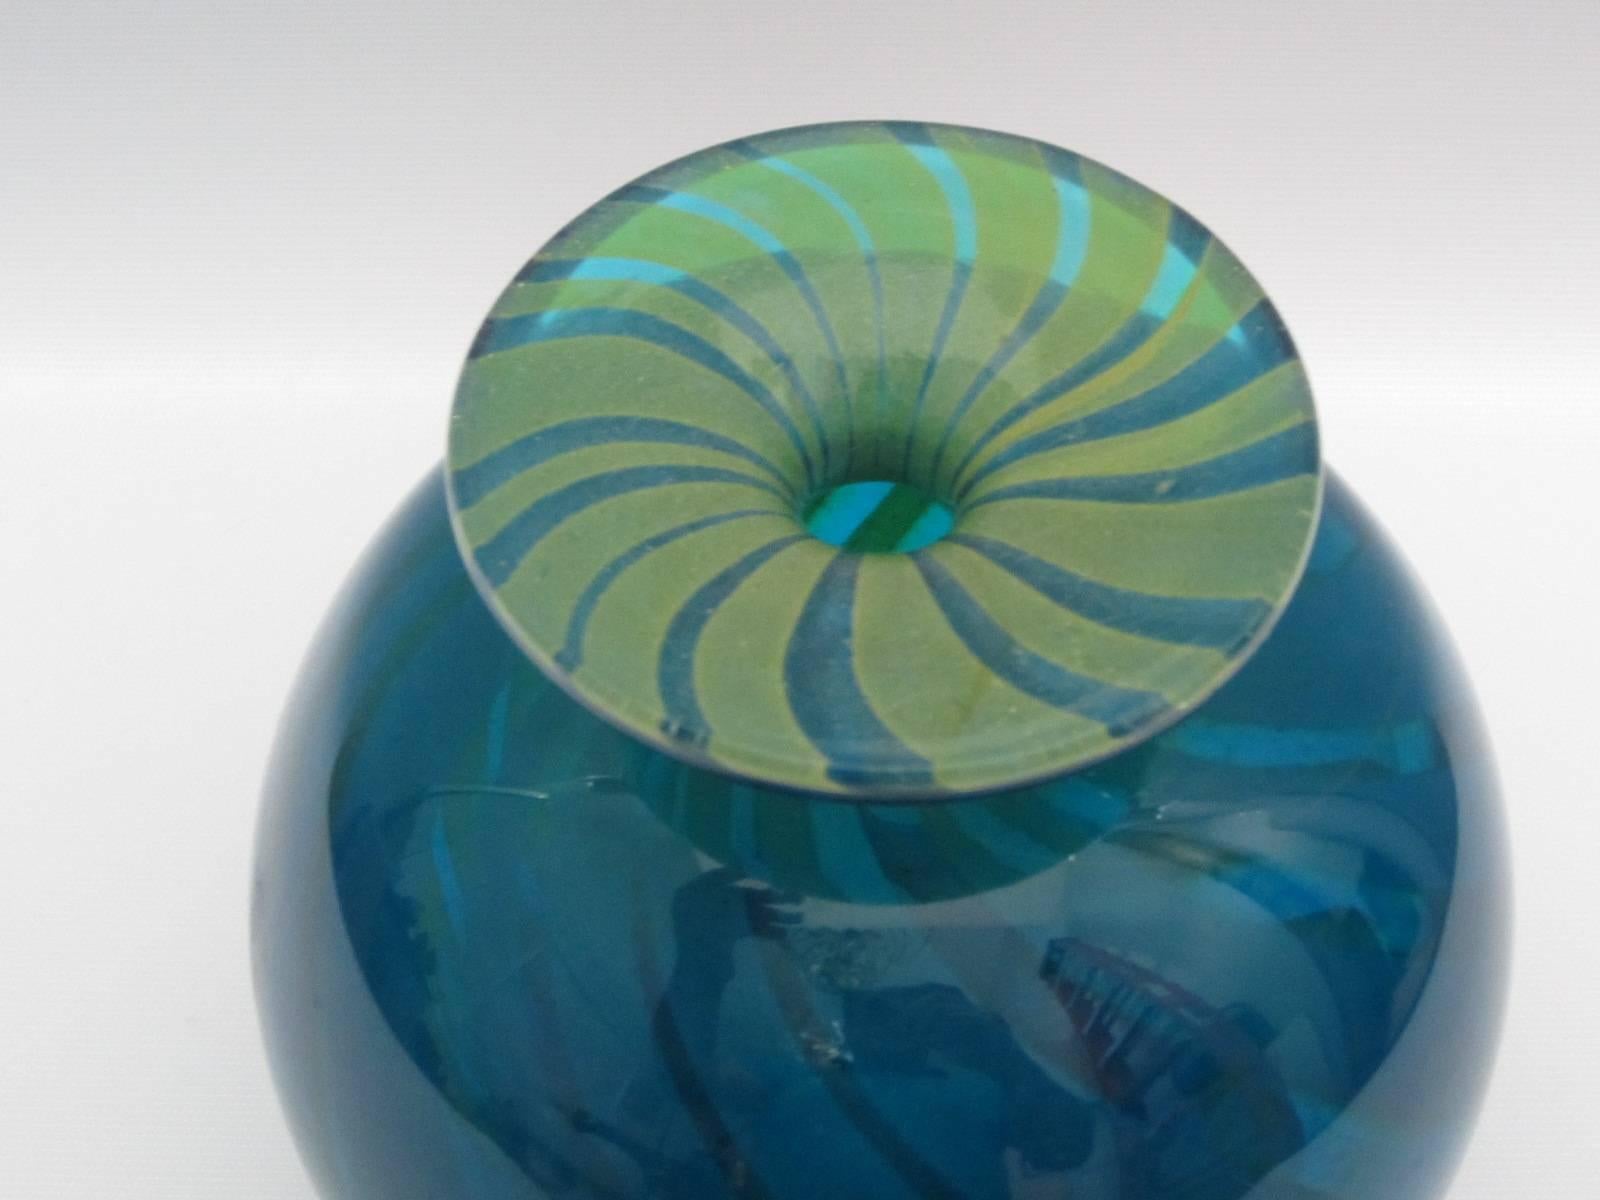 Italian Blown Art Glass Vase in Blue and Green Swirl, Signed 2